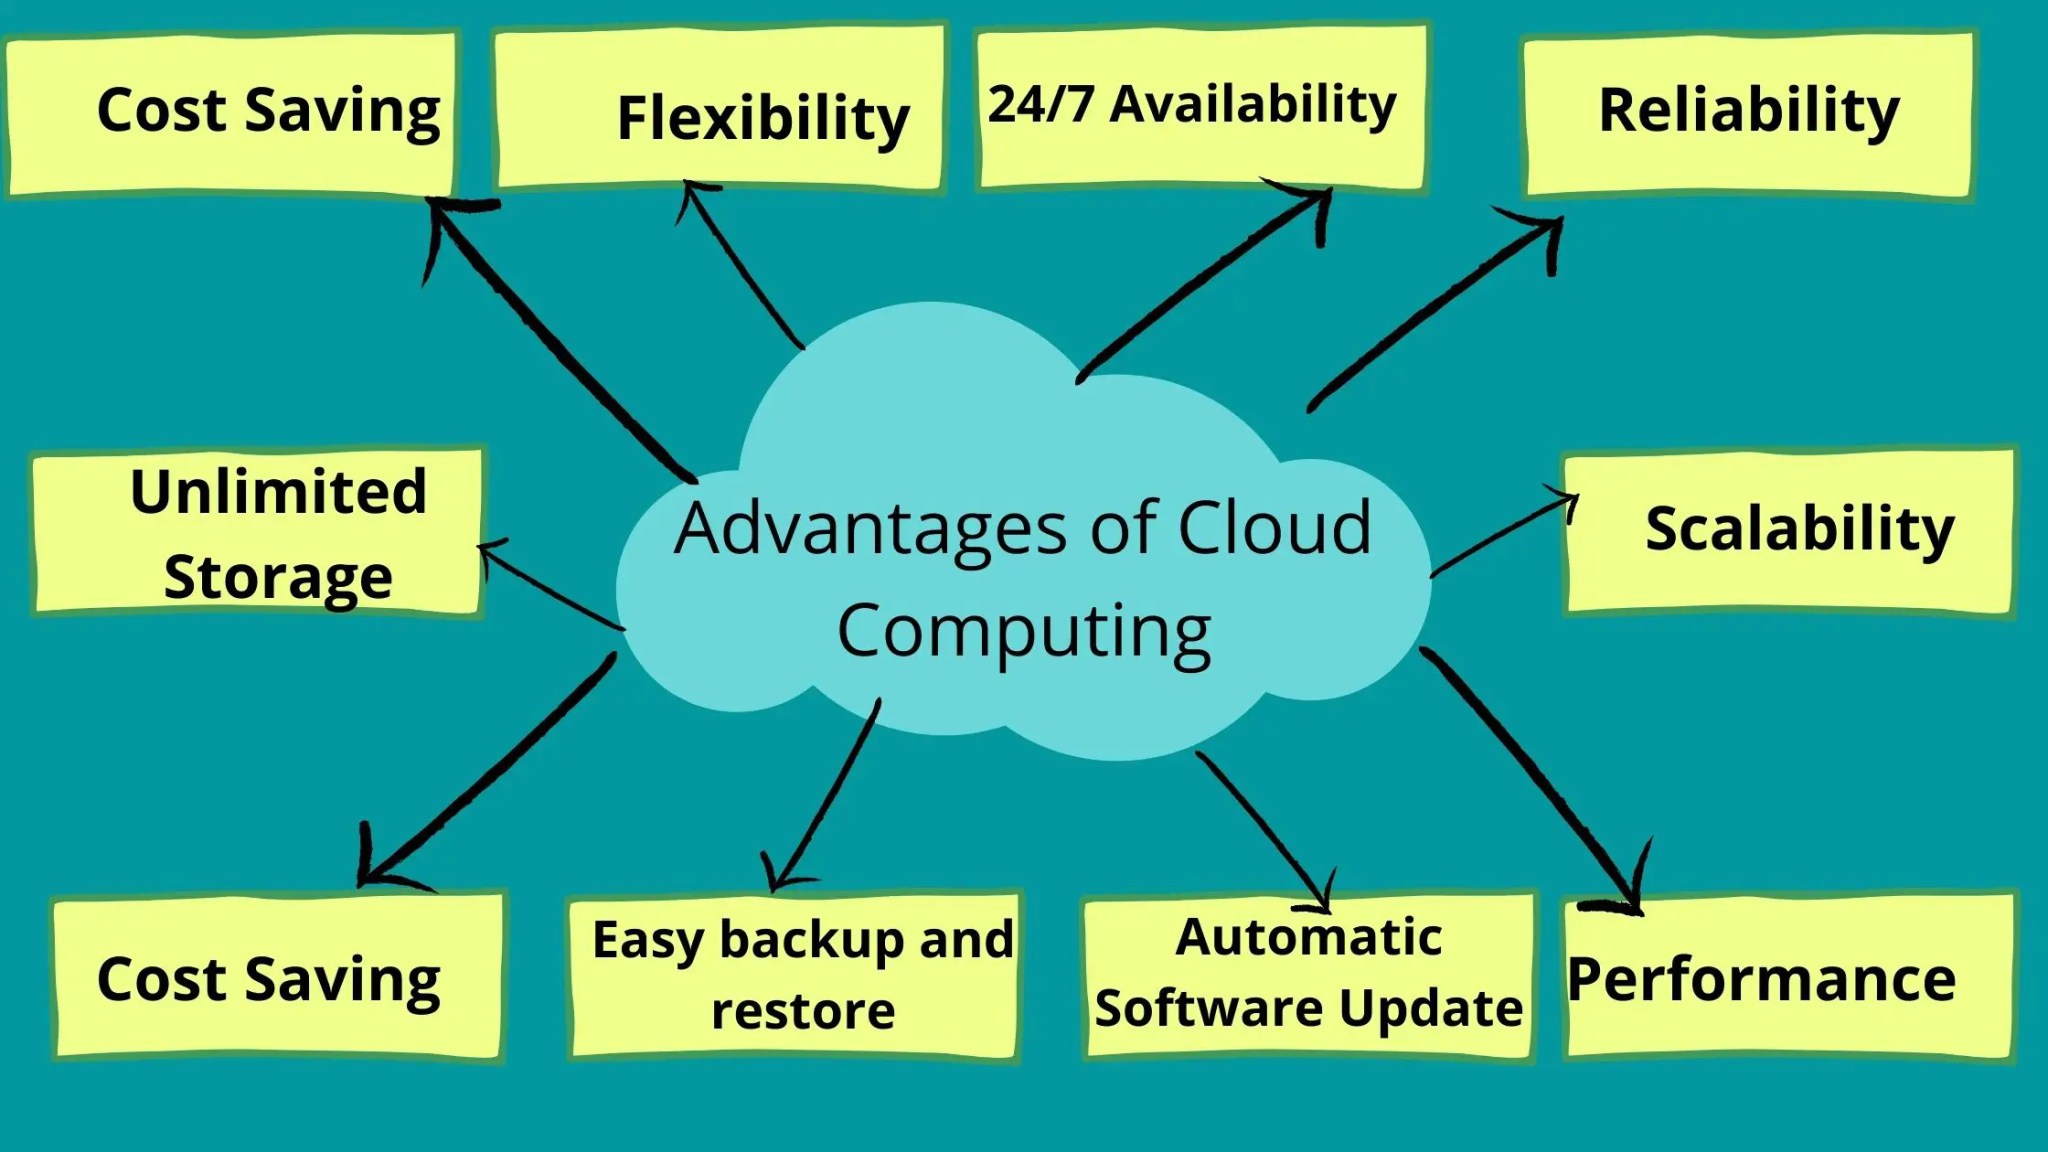 The image shows the advantages of cloud computing, which are cost saving, flexibility, 24/7 availability, reliability, unlimited storage, scalability, easy backup and restore, automatic software update, and performance.